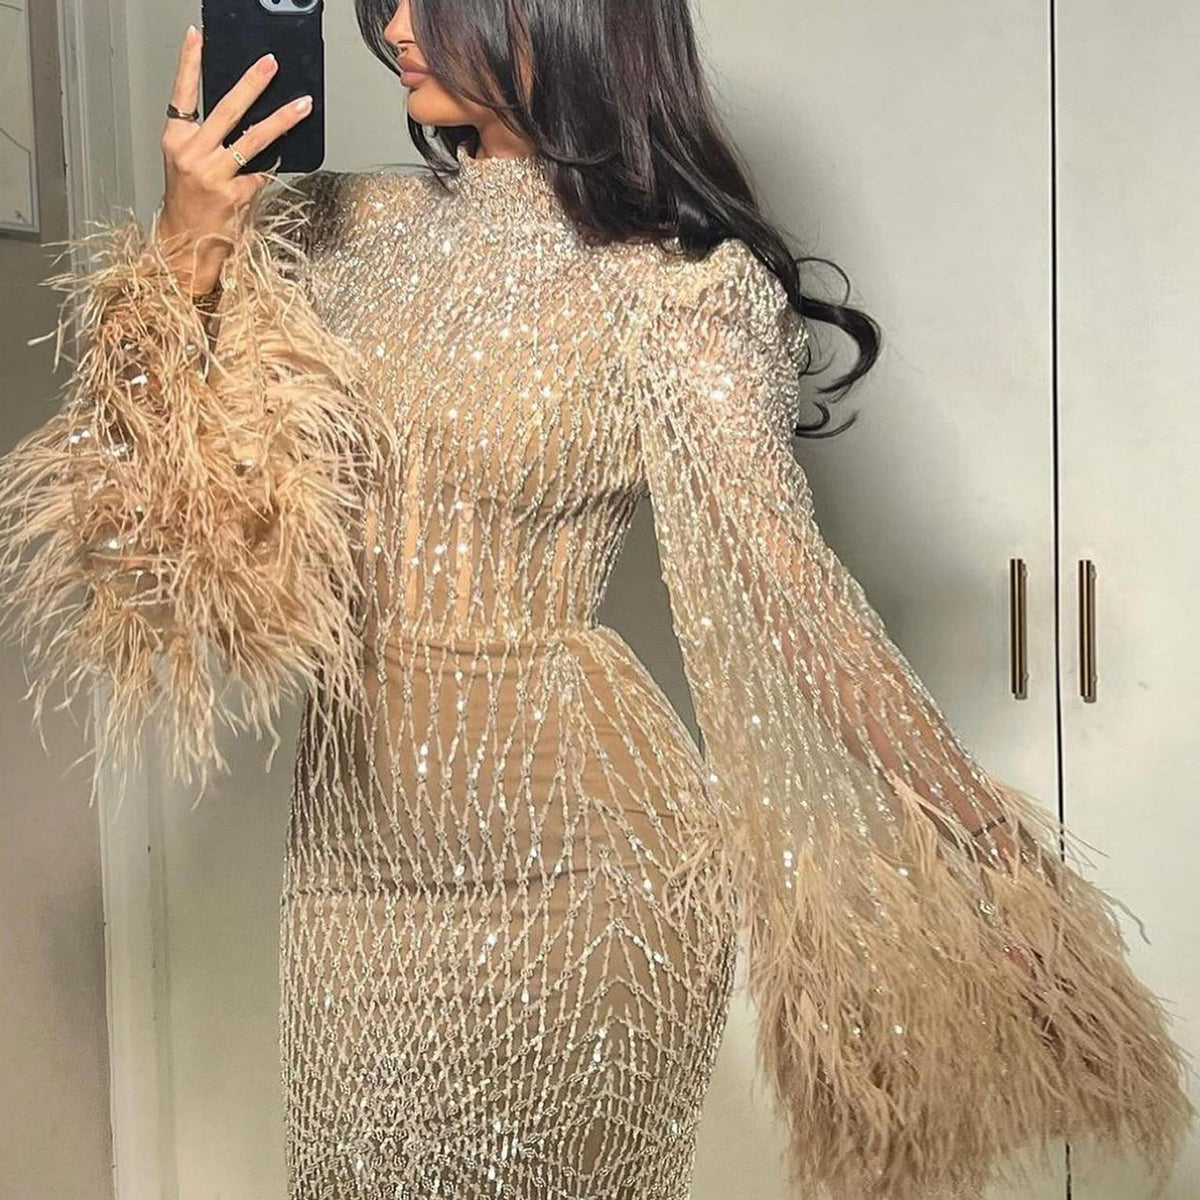 Sharon Said Luxury Dubai Feathers Nude Evening Dresses Long Sleeves Elegant High Neck Arabic Wedding Formal Party Gowns SS227